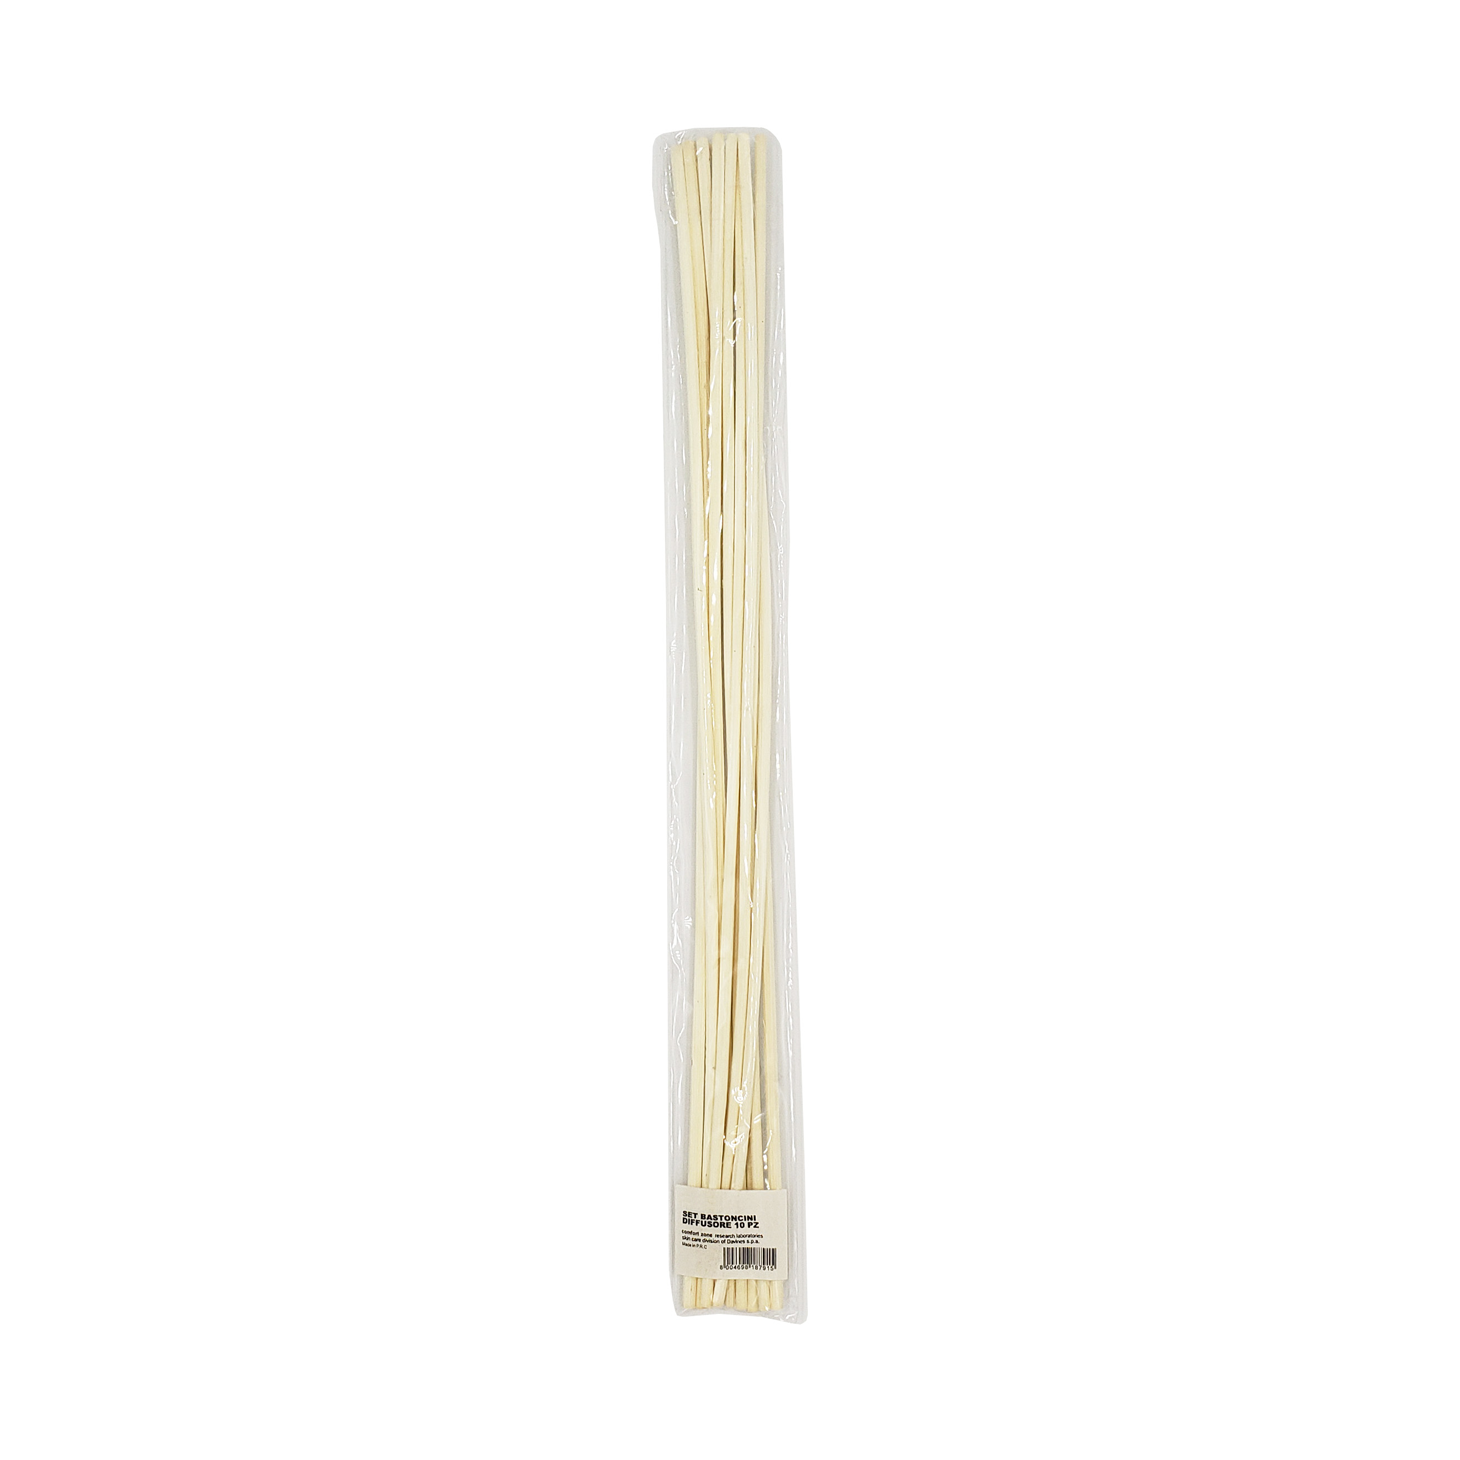 Tranquillity Home Fragrance Bamboo Reeds